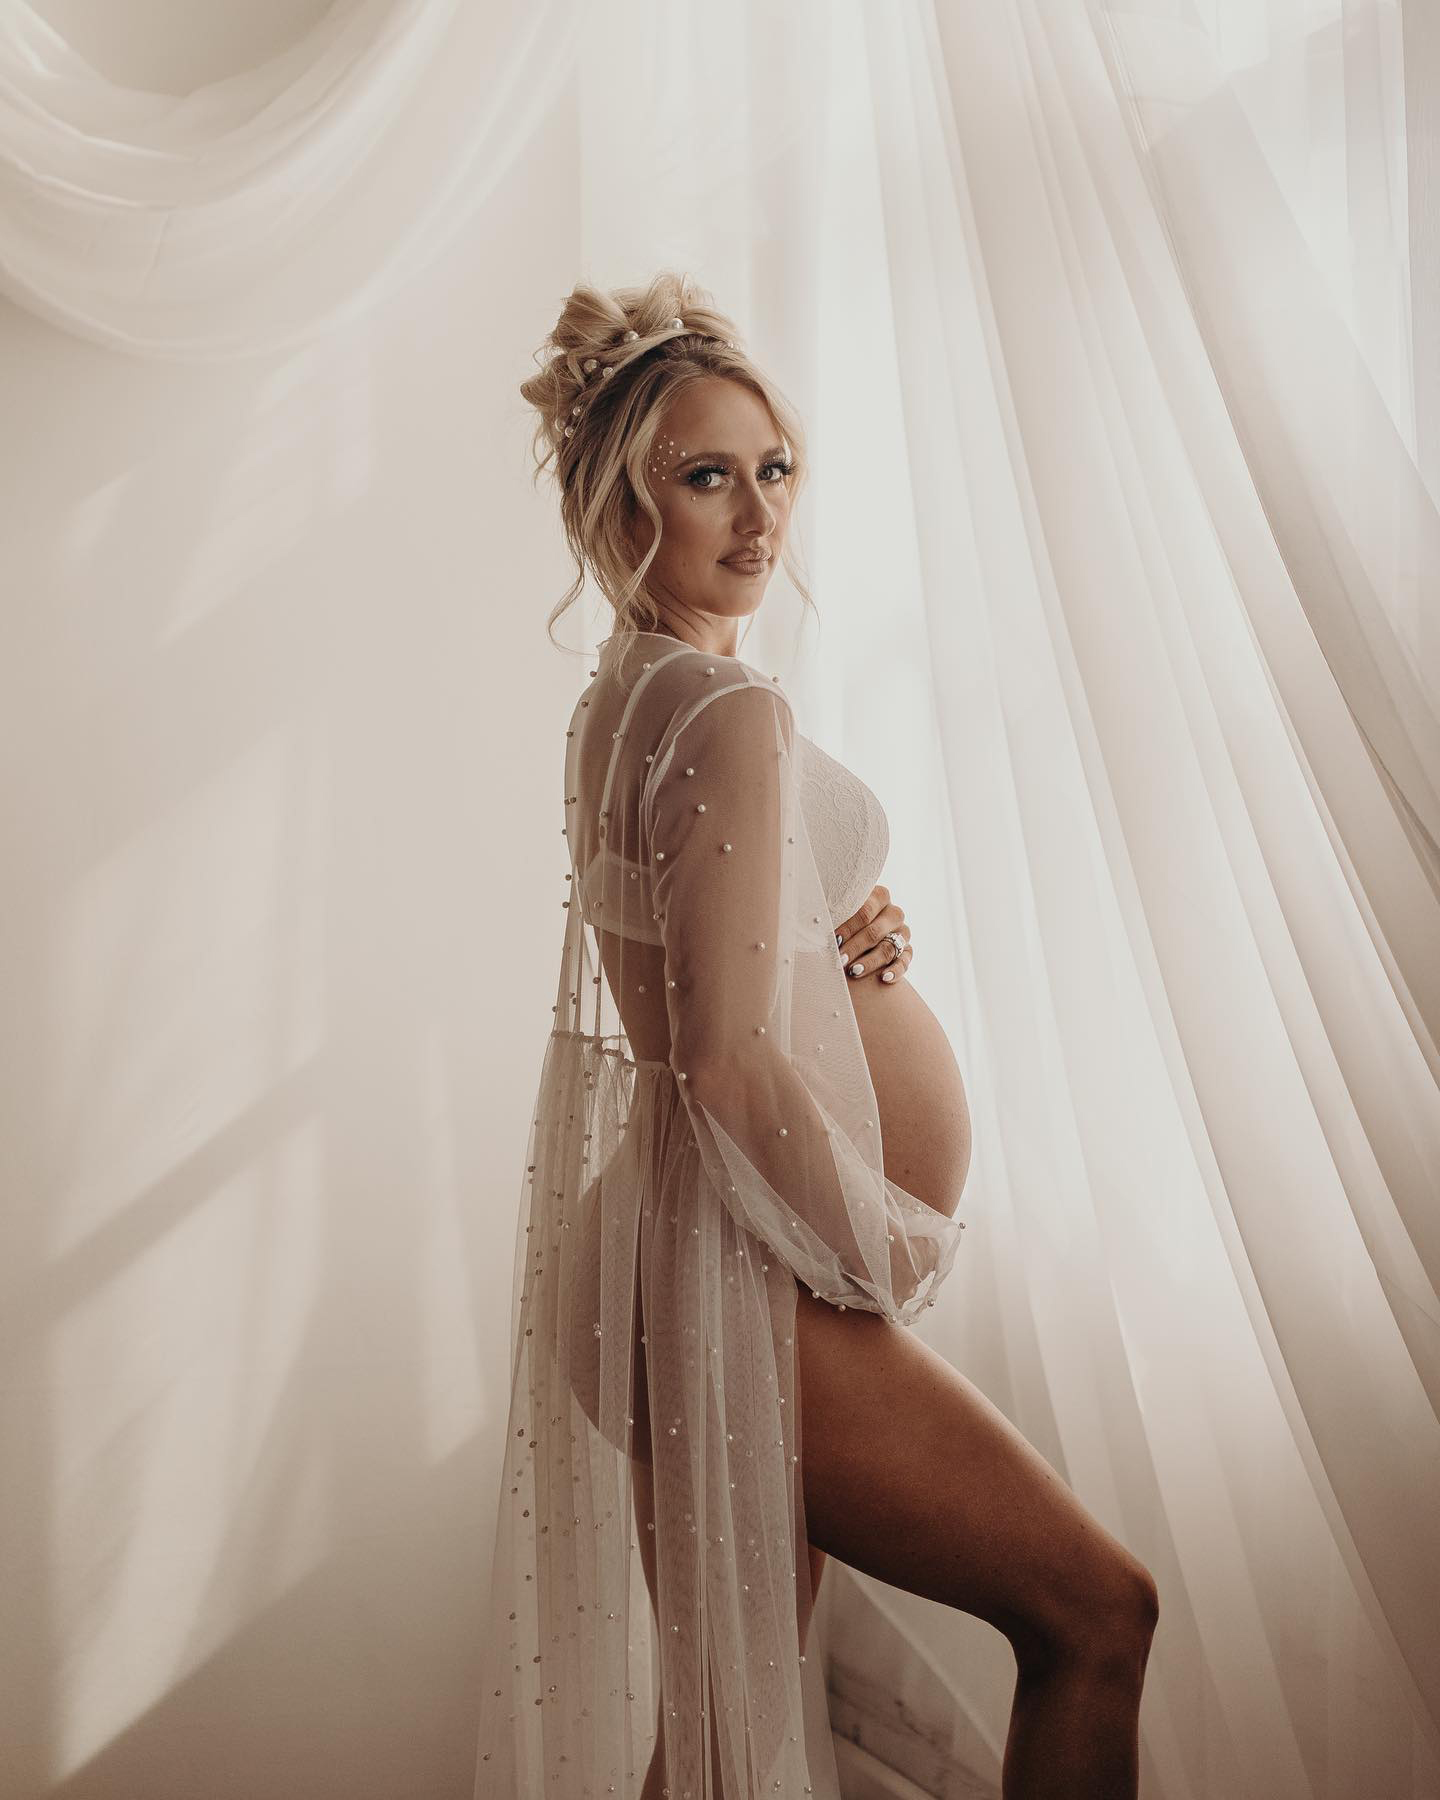 Brittany Matthews Embraced Body More This Pregnancy Pics picture